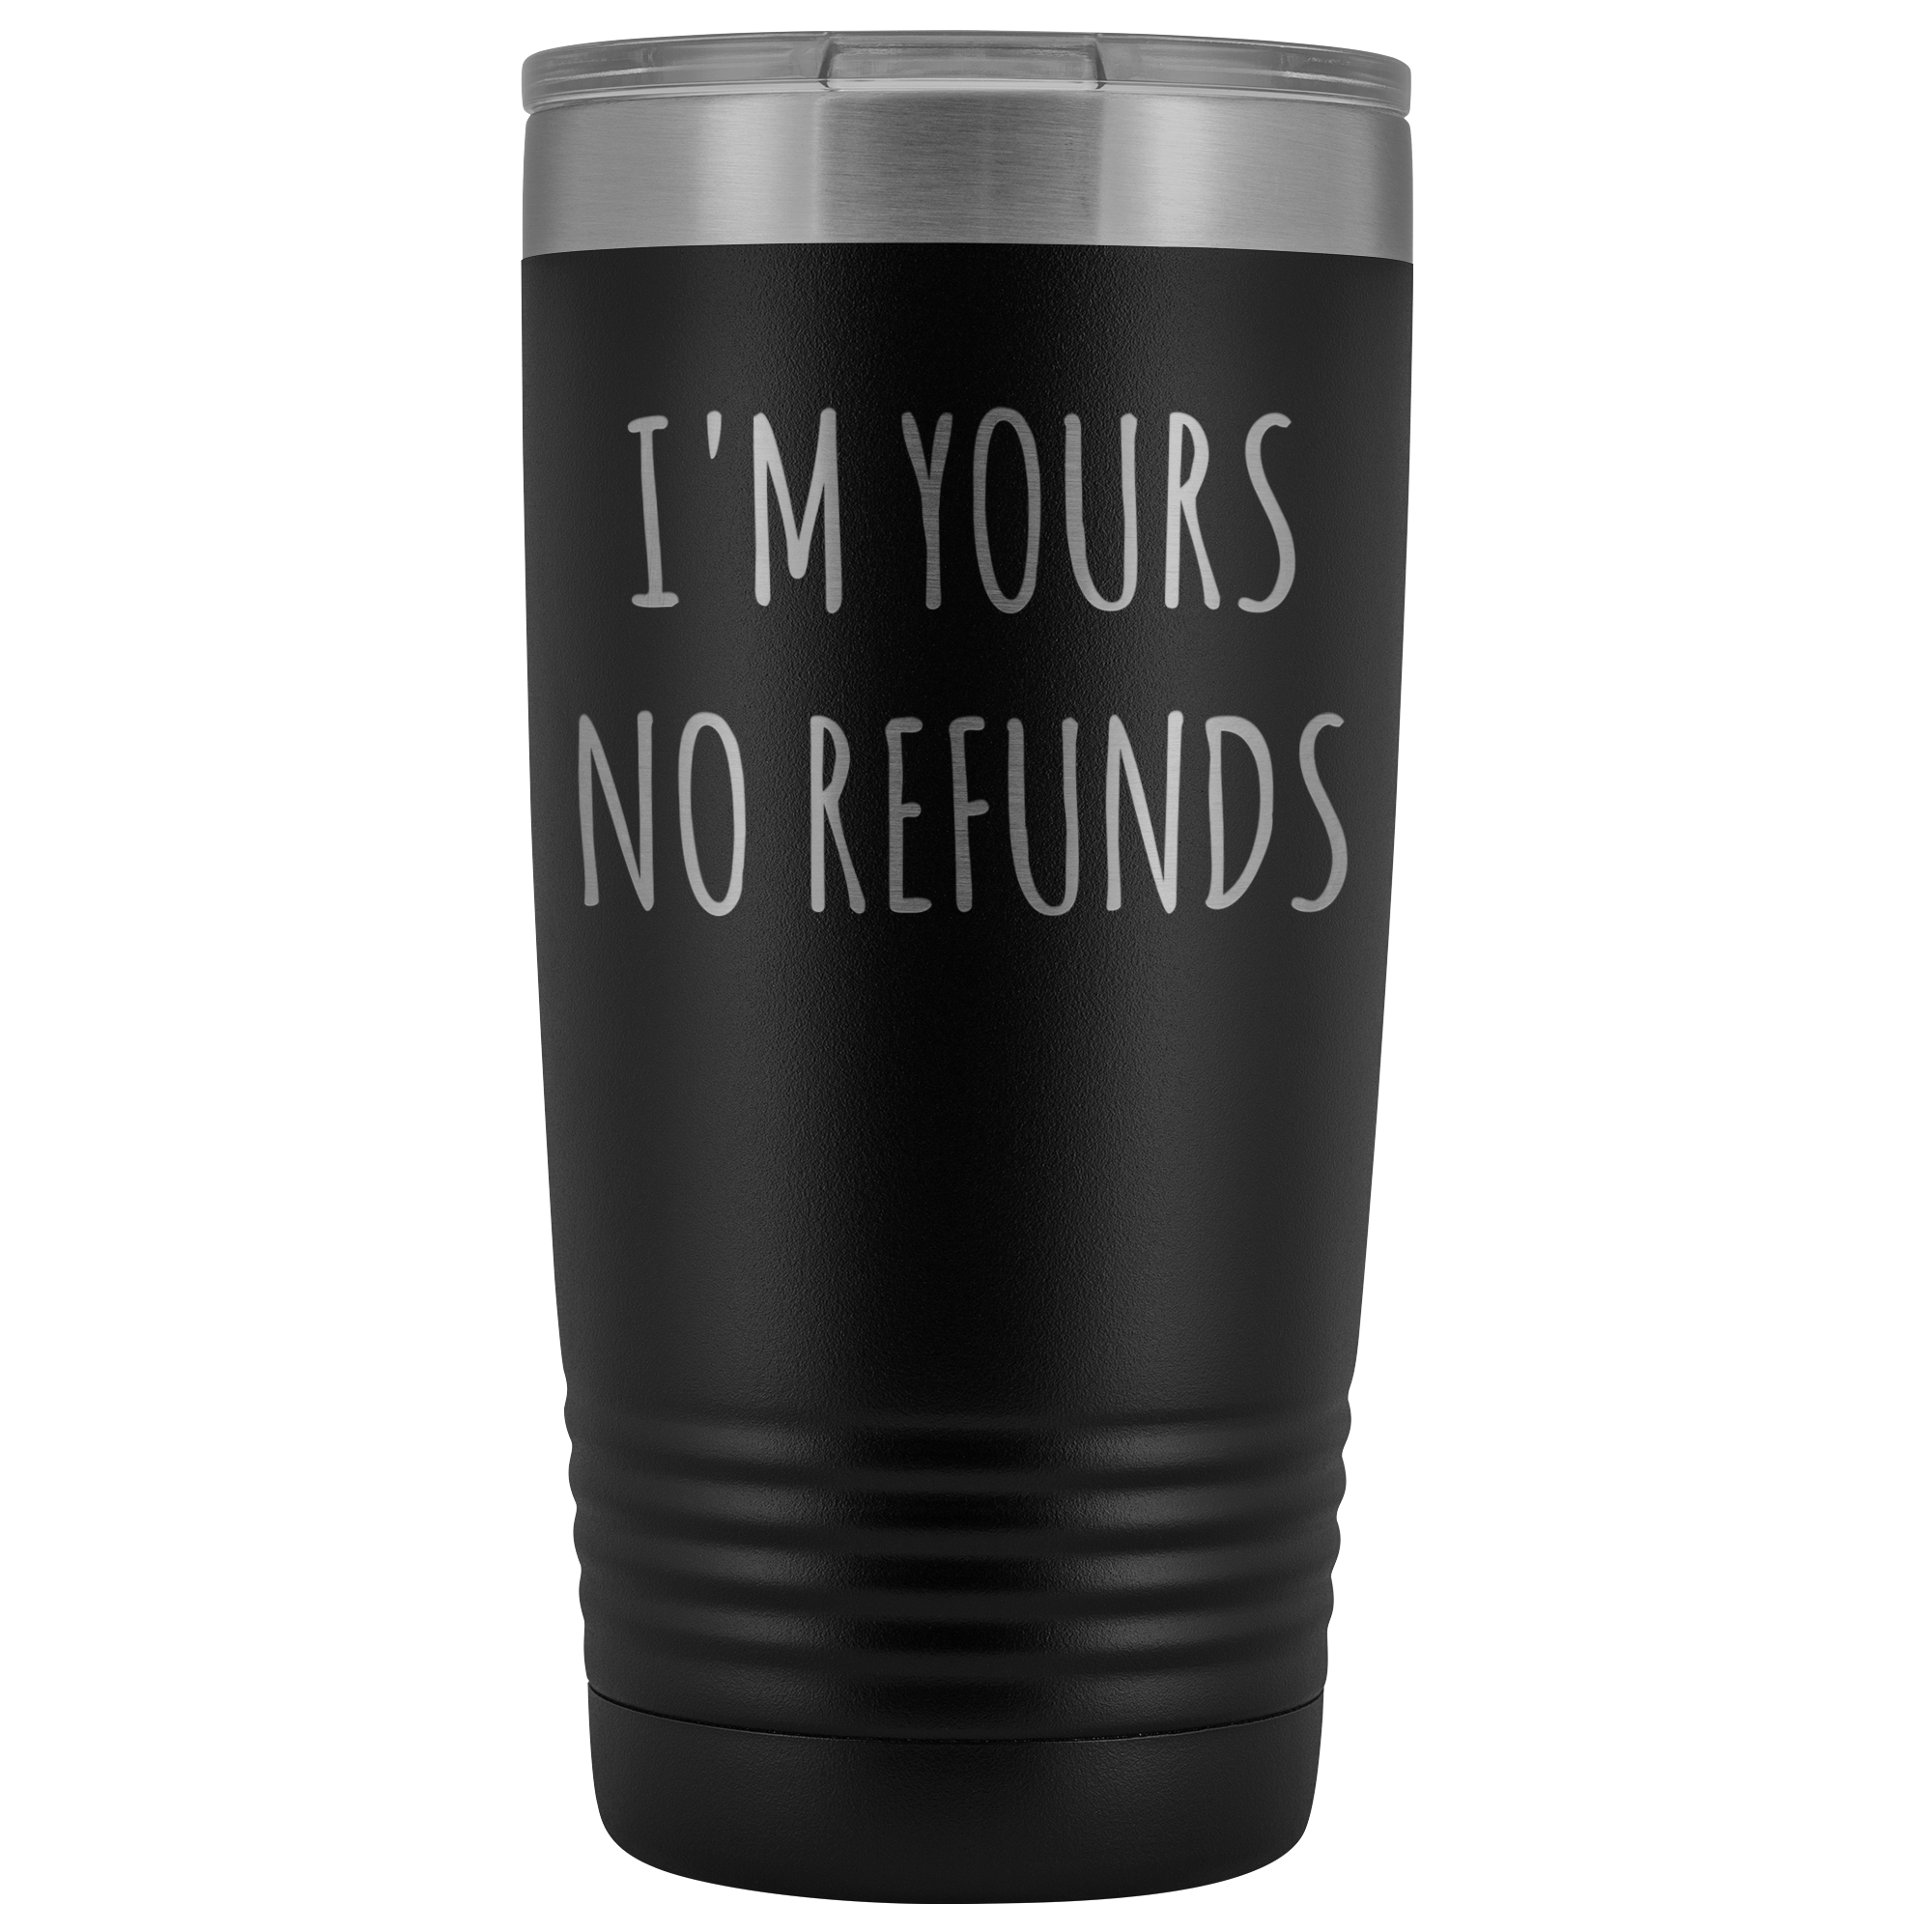 I'm Yours No Refunds Boyfriend Gift Idea Girlfriend Gifts Husband Wife Tumbler Funny Mug Metal Insulated Hot Cold Travel Coffee Cup 20oz BPA Free